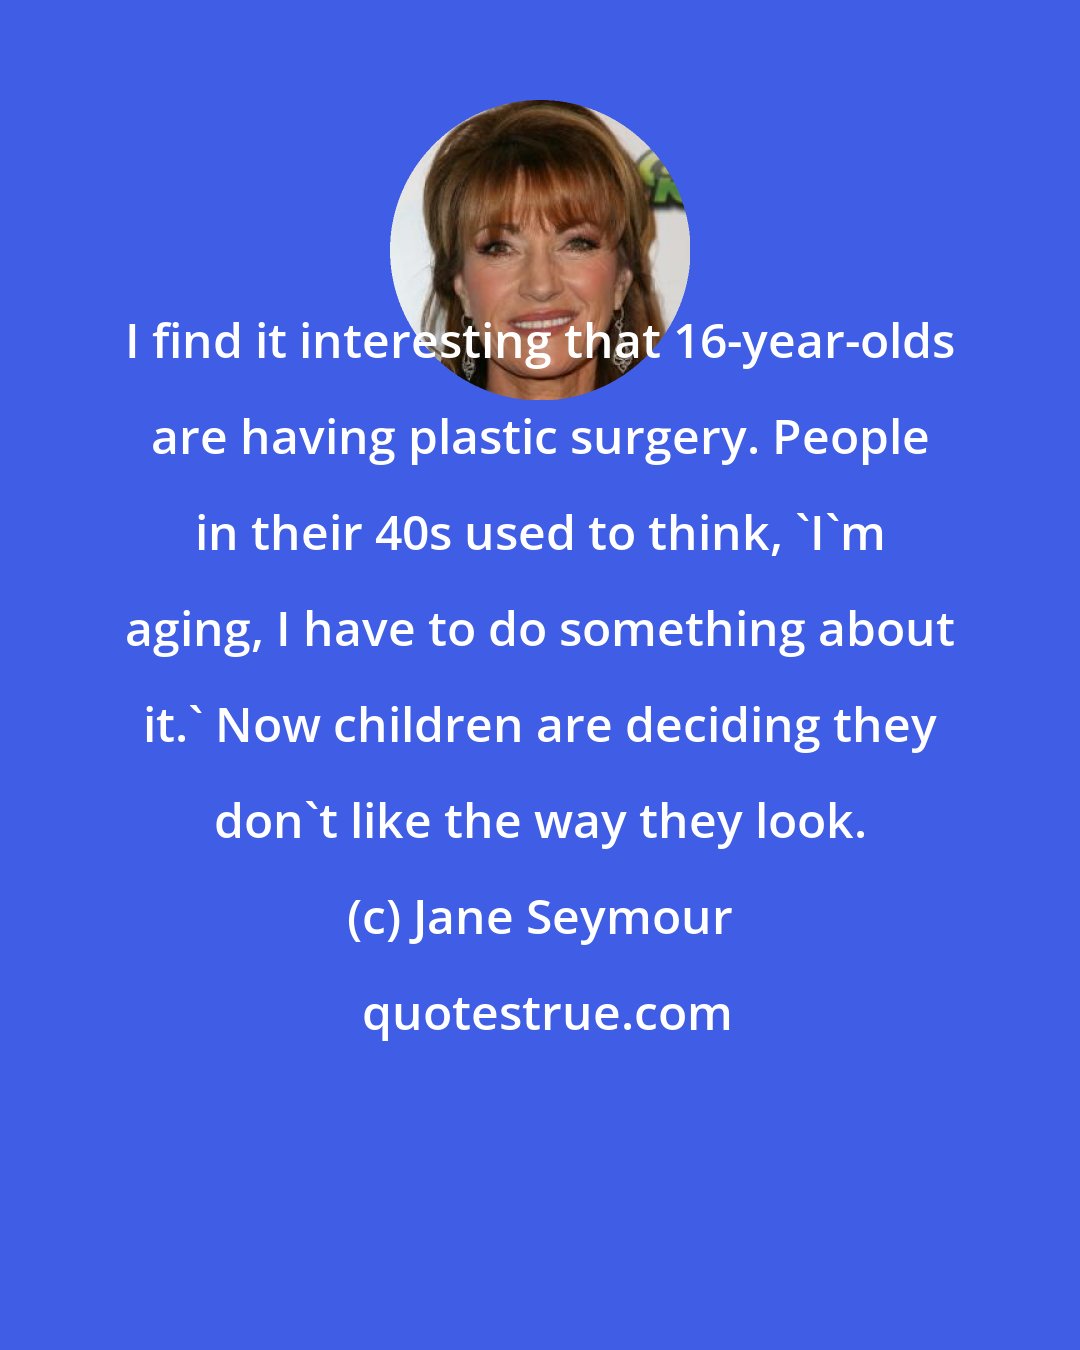 Jane Seymour: I find it interesting that 16-year-olds are having plastic surgery. People in their 40s used to think, 'I'm aging, I have to do something about it.' Now children are deciding they don't like the way they look.